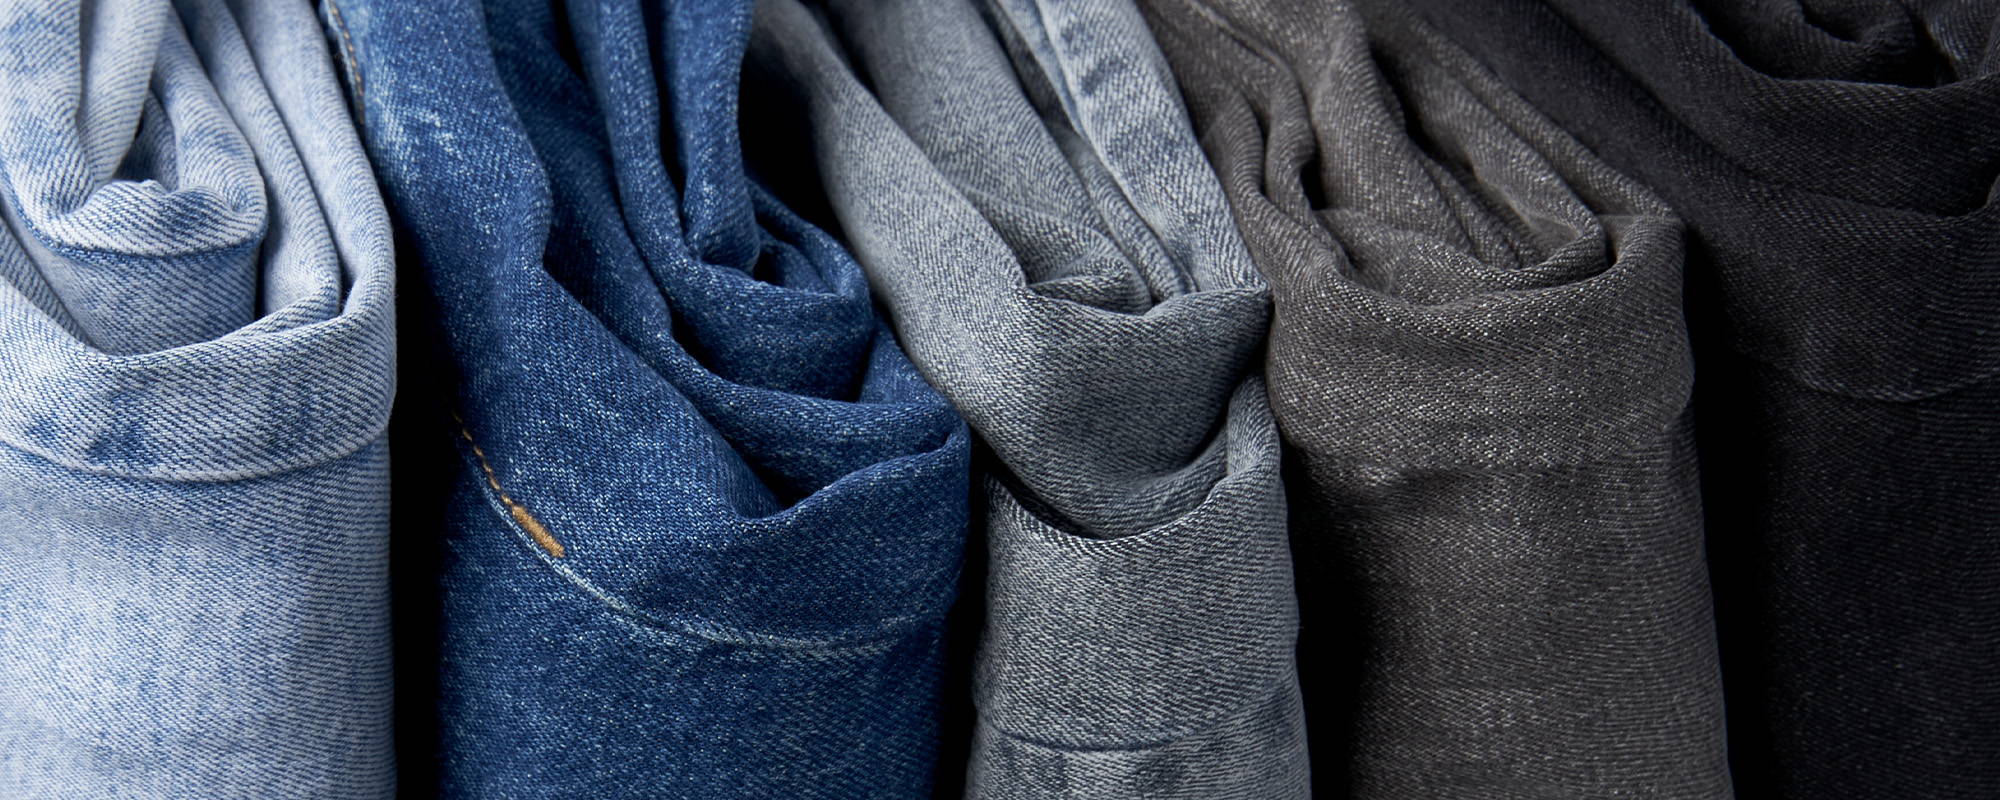 A stack of tall women's jeans in light blue, dark blue, grey and black